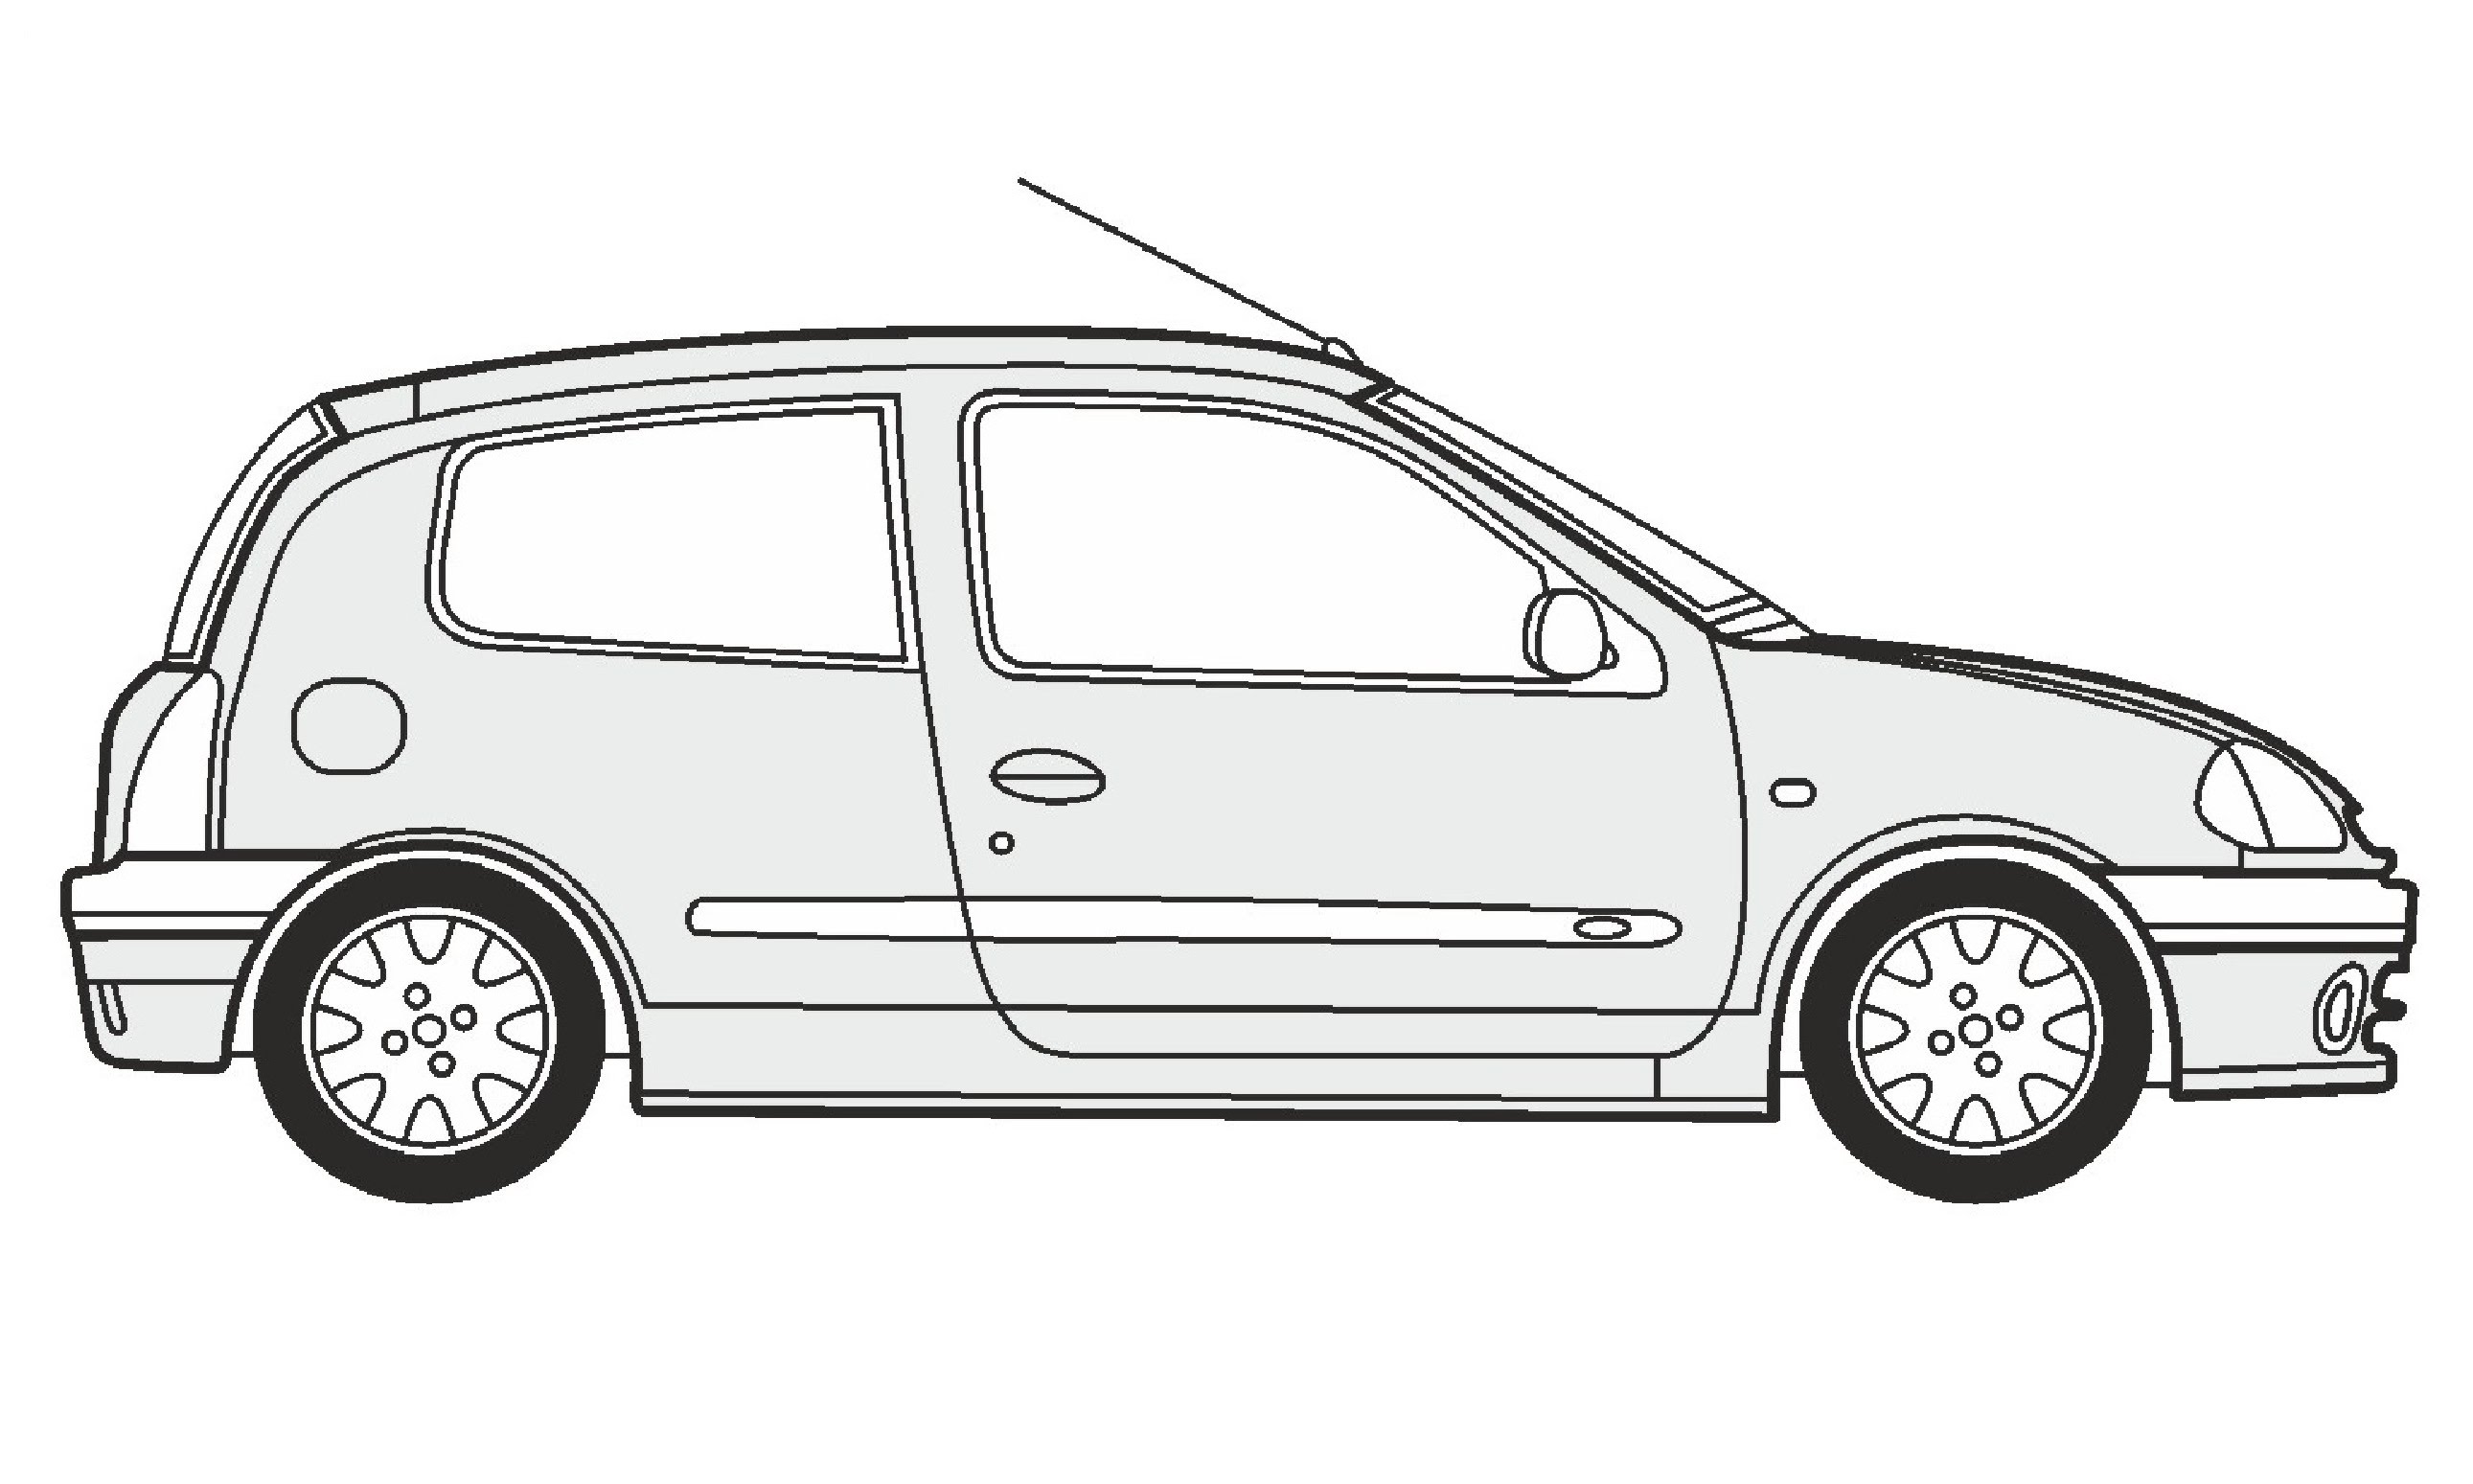 Renault Picture Drawing